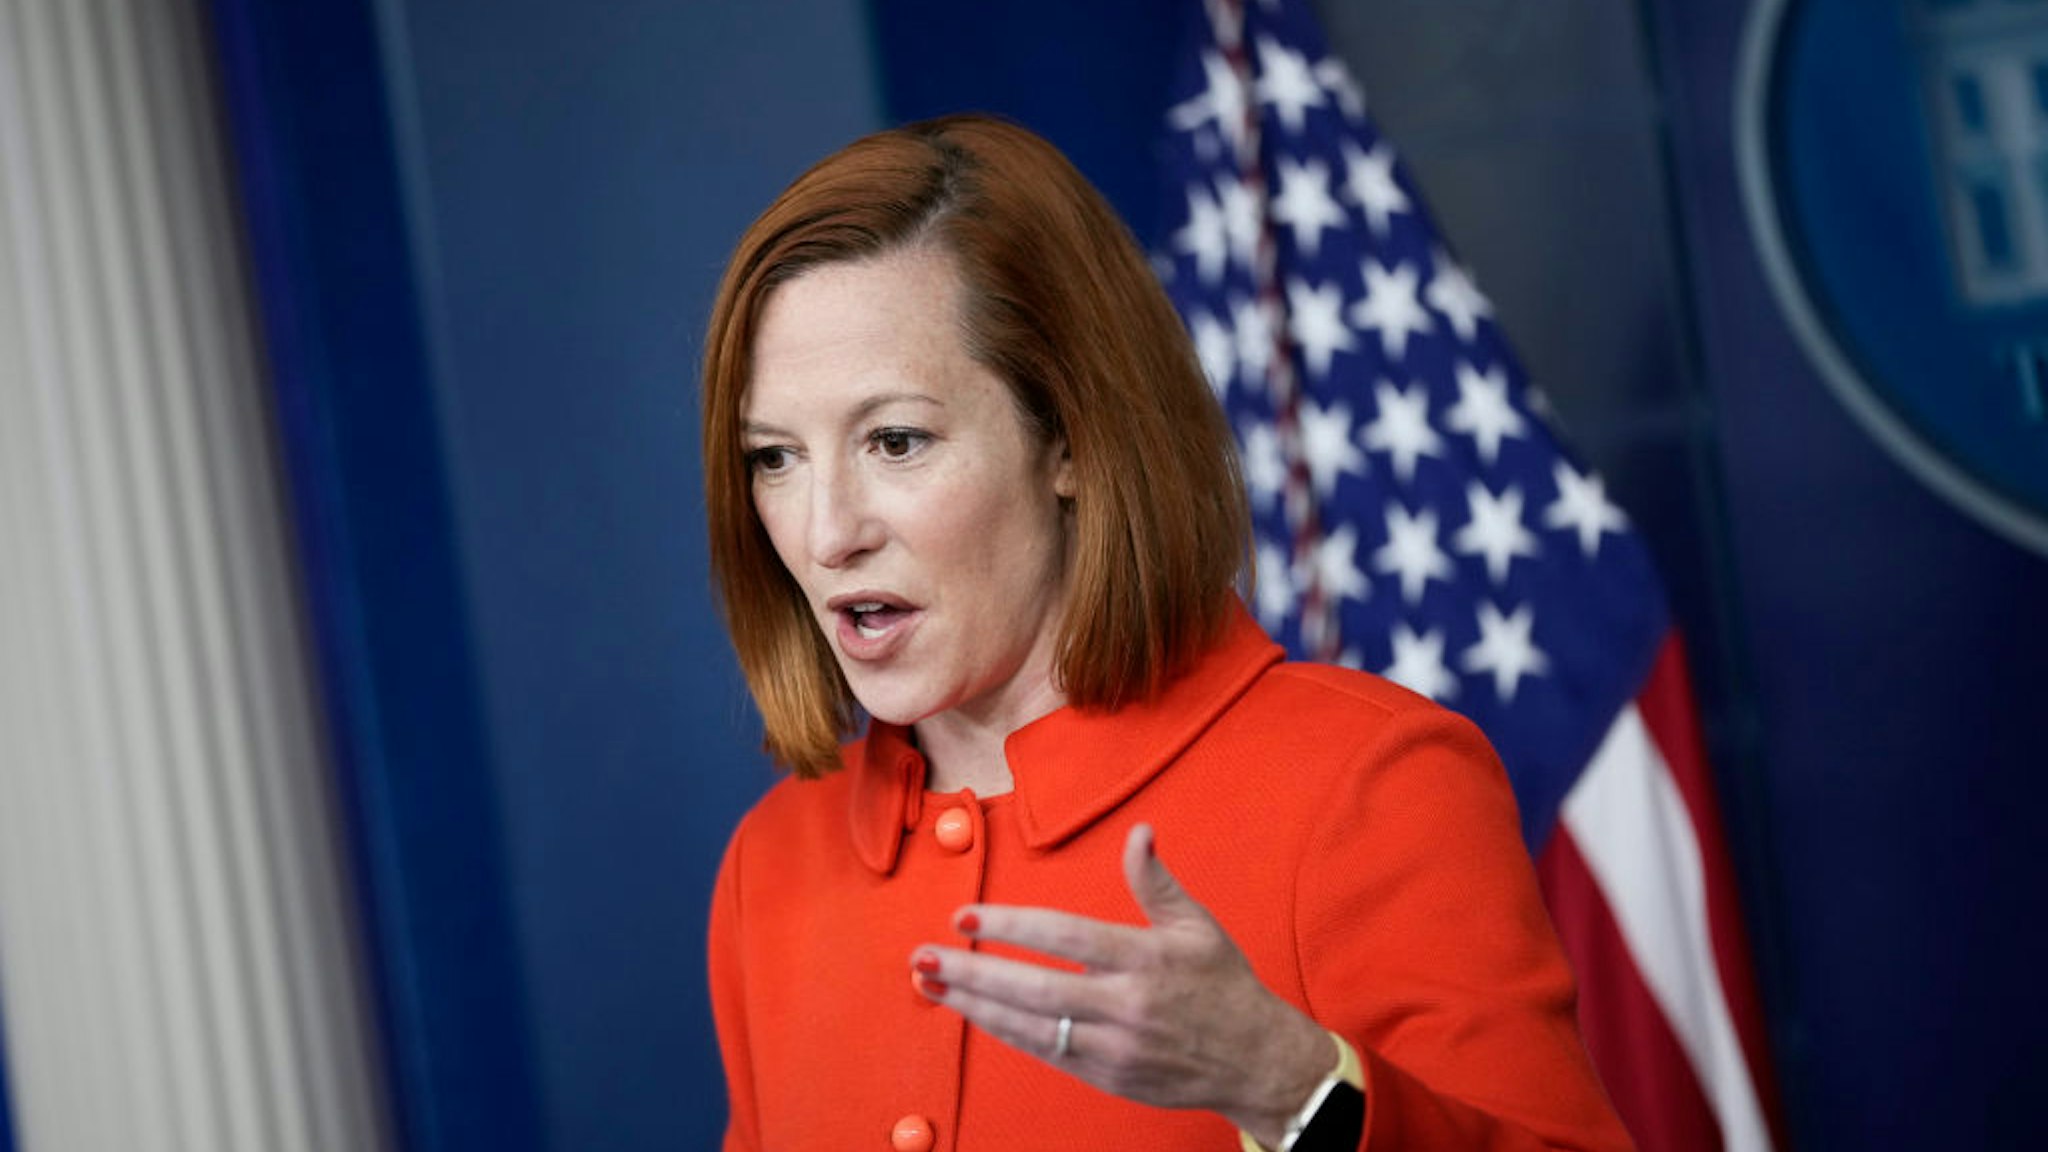 WASHINGTON, DC - DECEMBER 20: White House Press Secretary Jen Psaki speaks during the daily press briefing at the White House December 20, 2021 in Washington, DC. Psaki fielded several questions about Sen. Joe Manchin's (D-WV) announcement over the weekend that he will not support the Biden administration's social spending bill. (Photo by Drew Angerer/Getty Images)